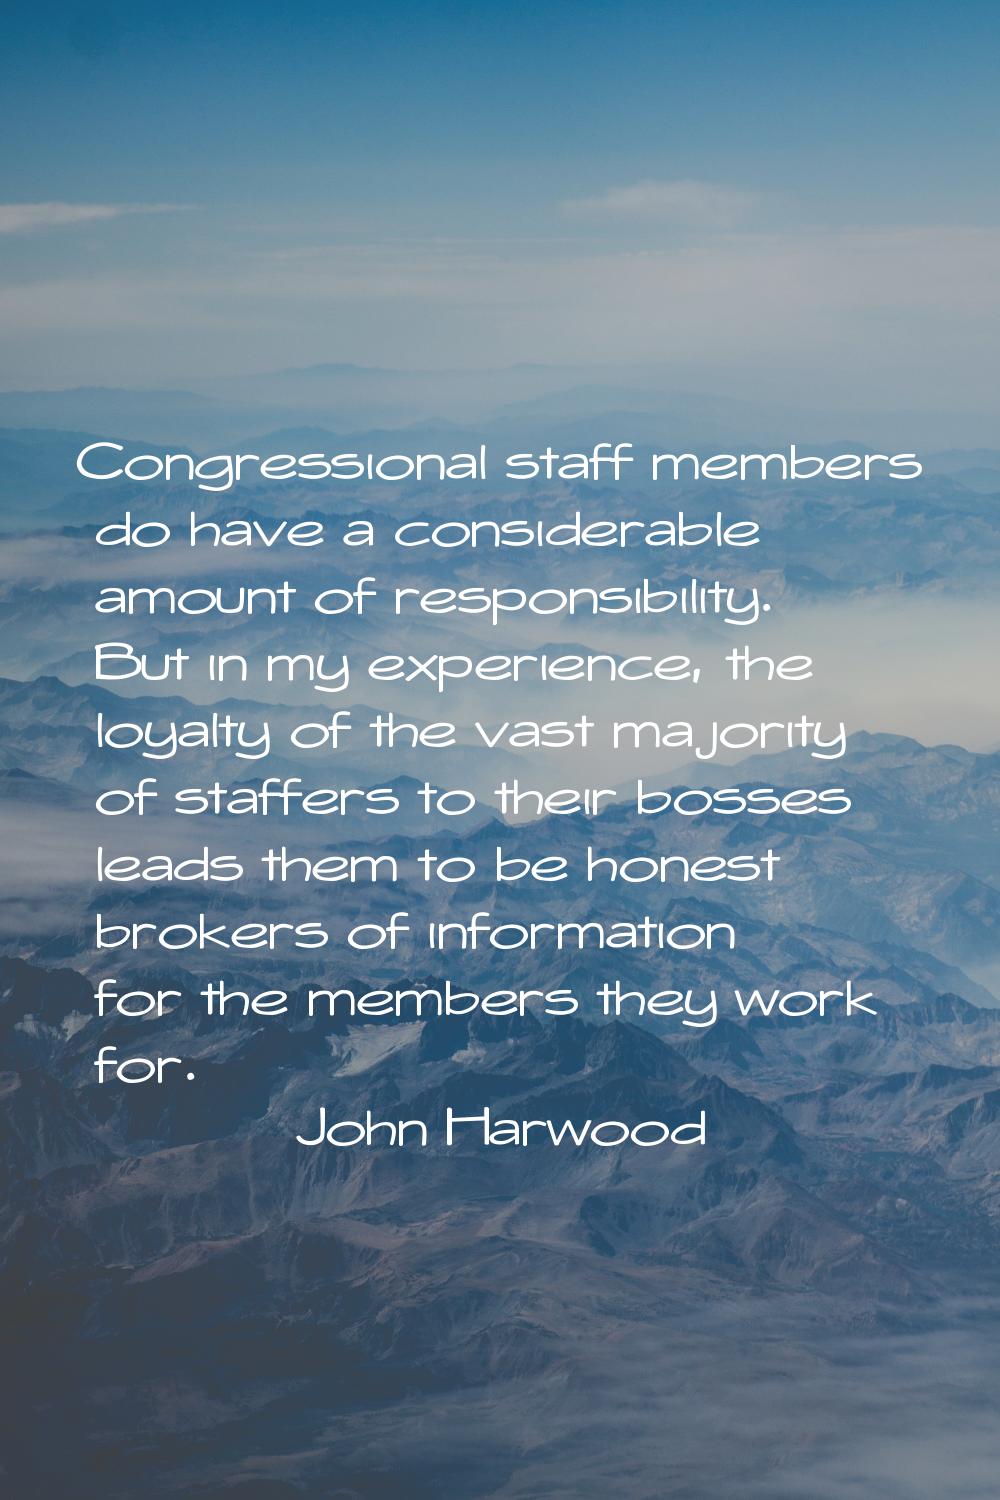 Congressional staff members do have a considerable amount of responsibility. But in my experience, 